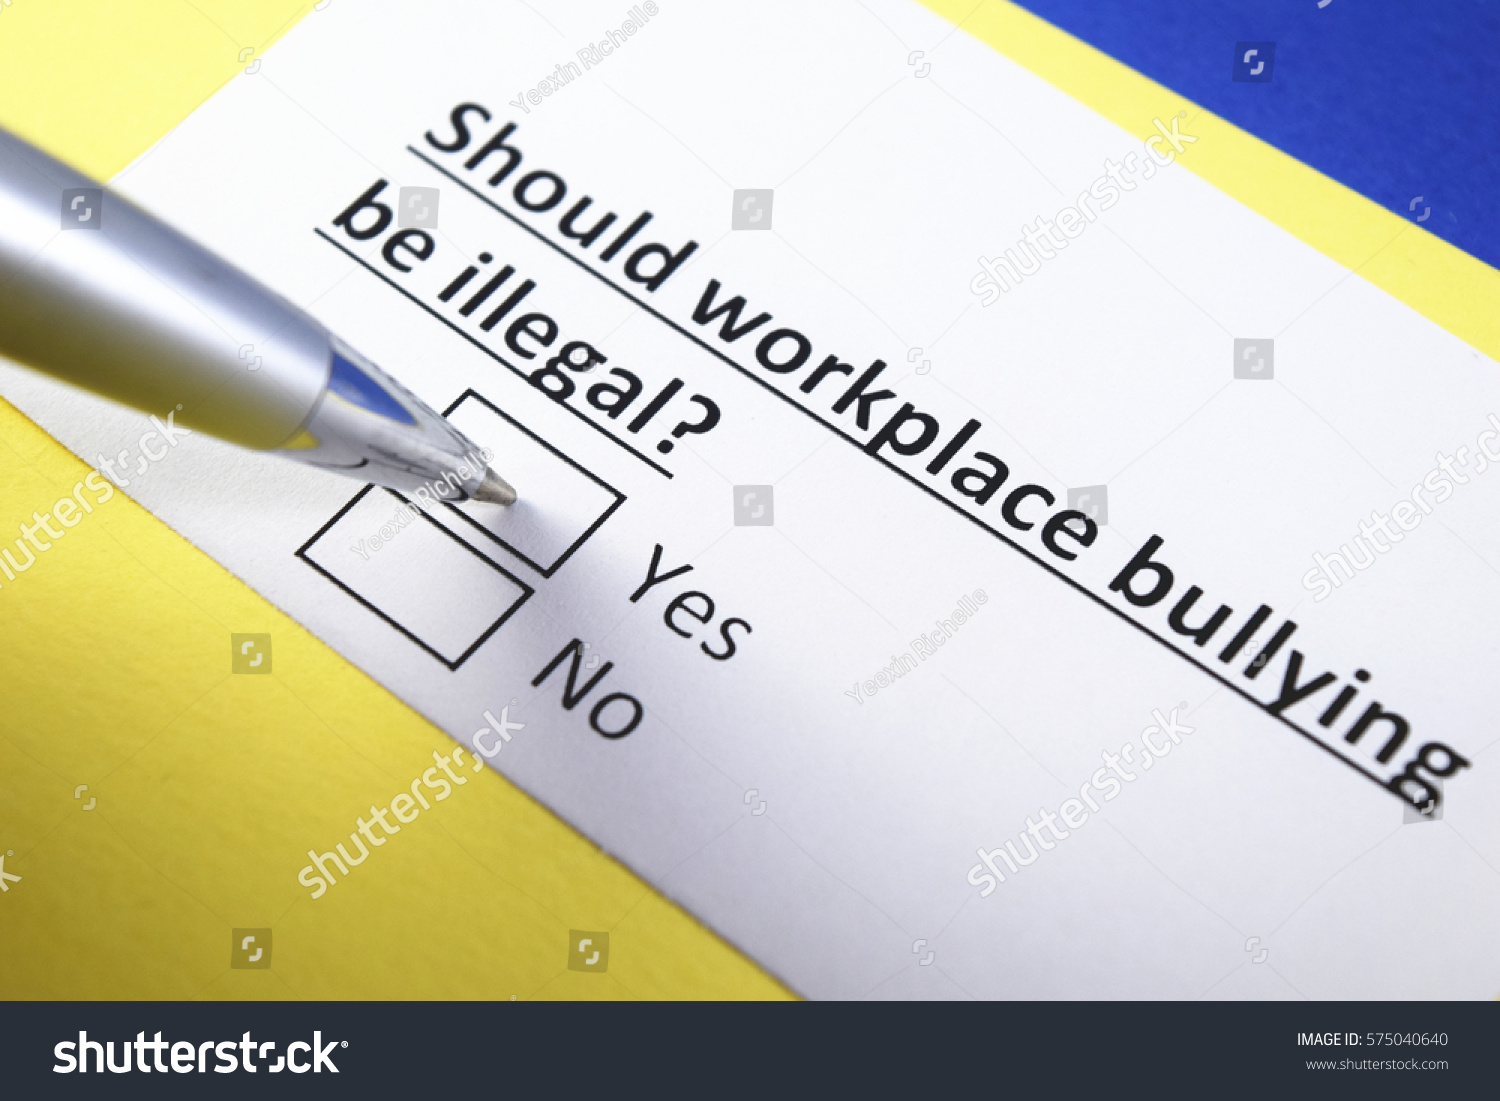 Should work place bullying be illegal? yes or no